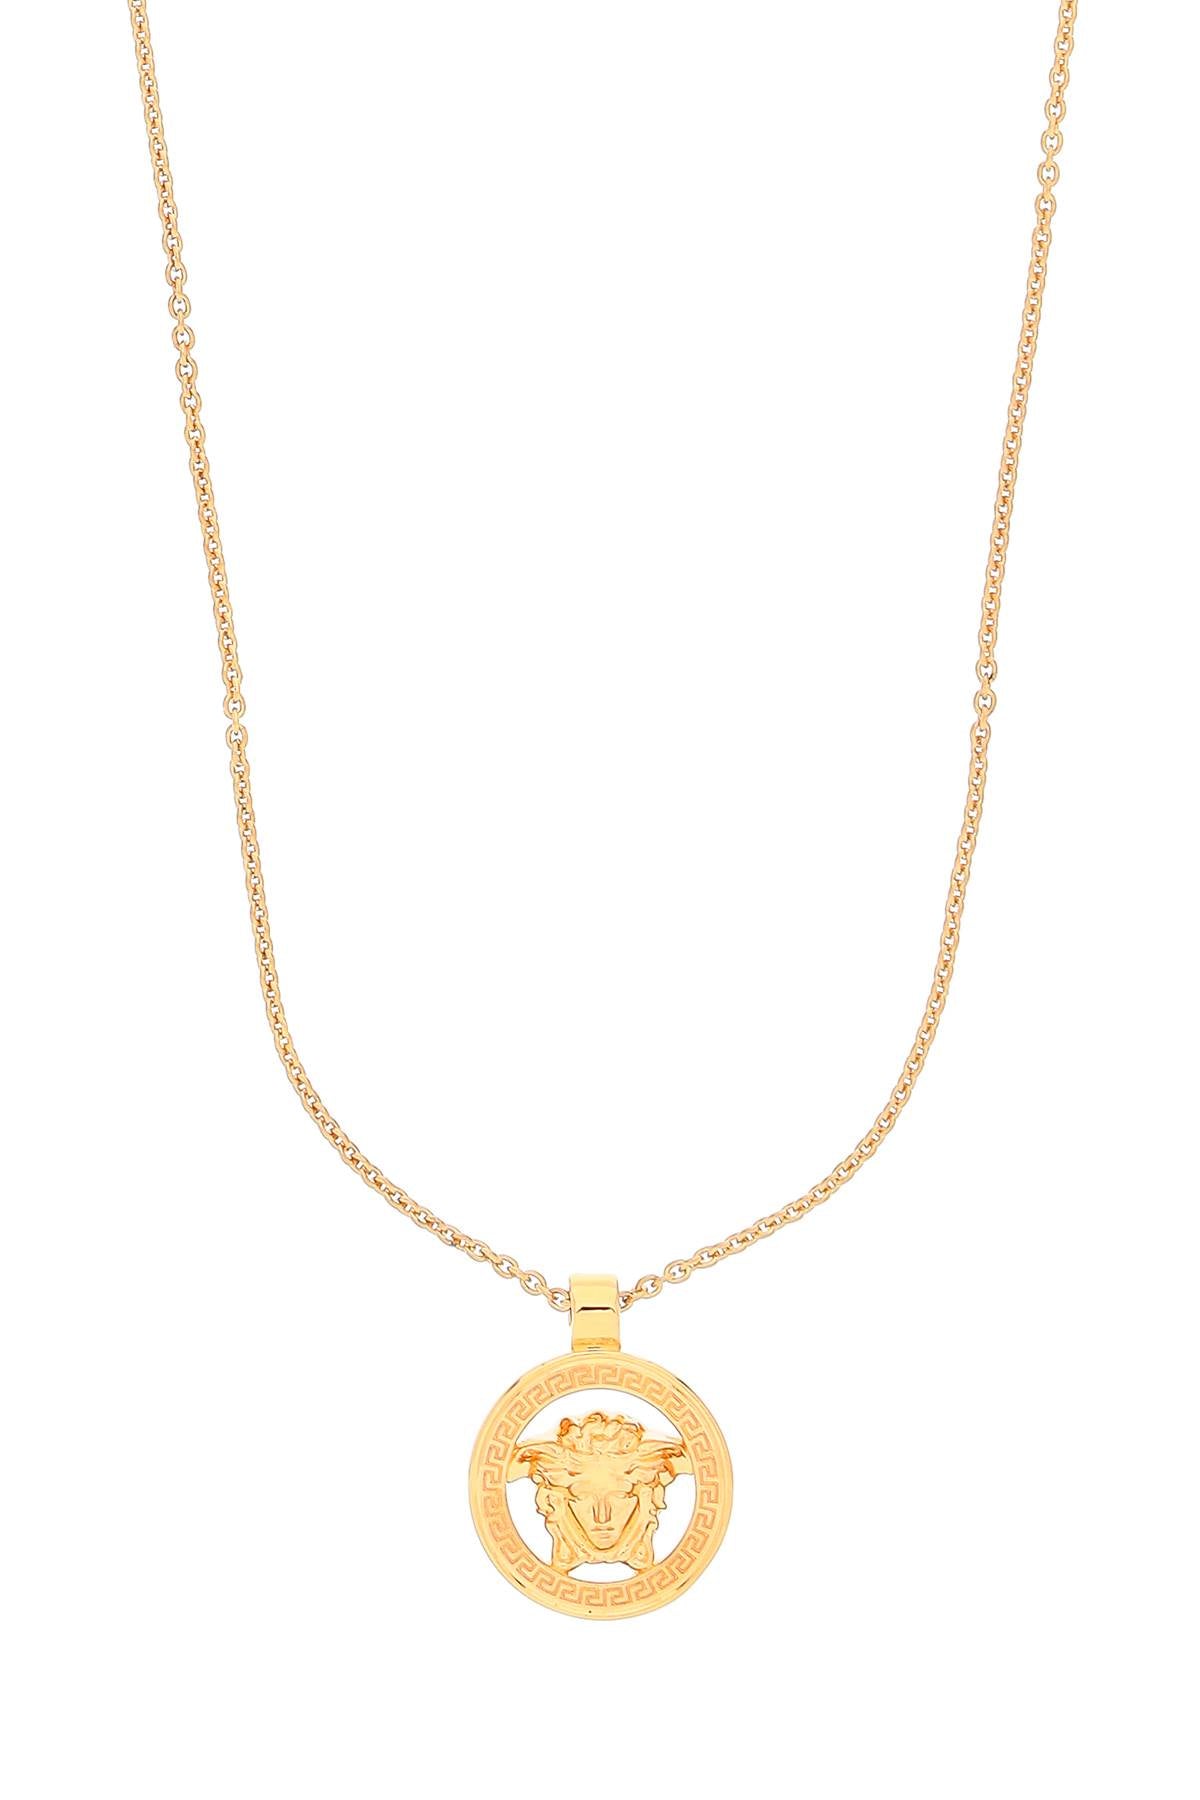 Versace Replace With Double Quotemedusa '95 Pendant Necklace   Gold